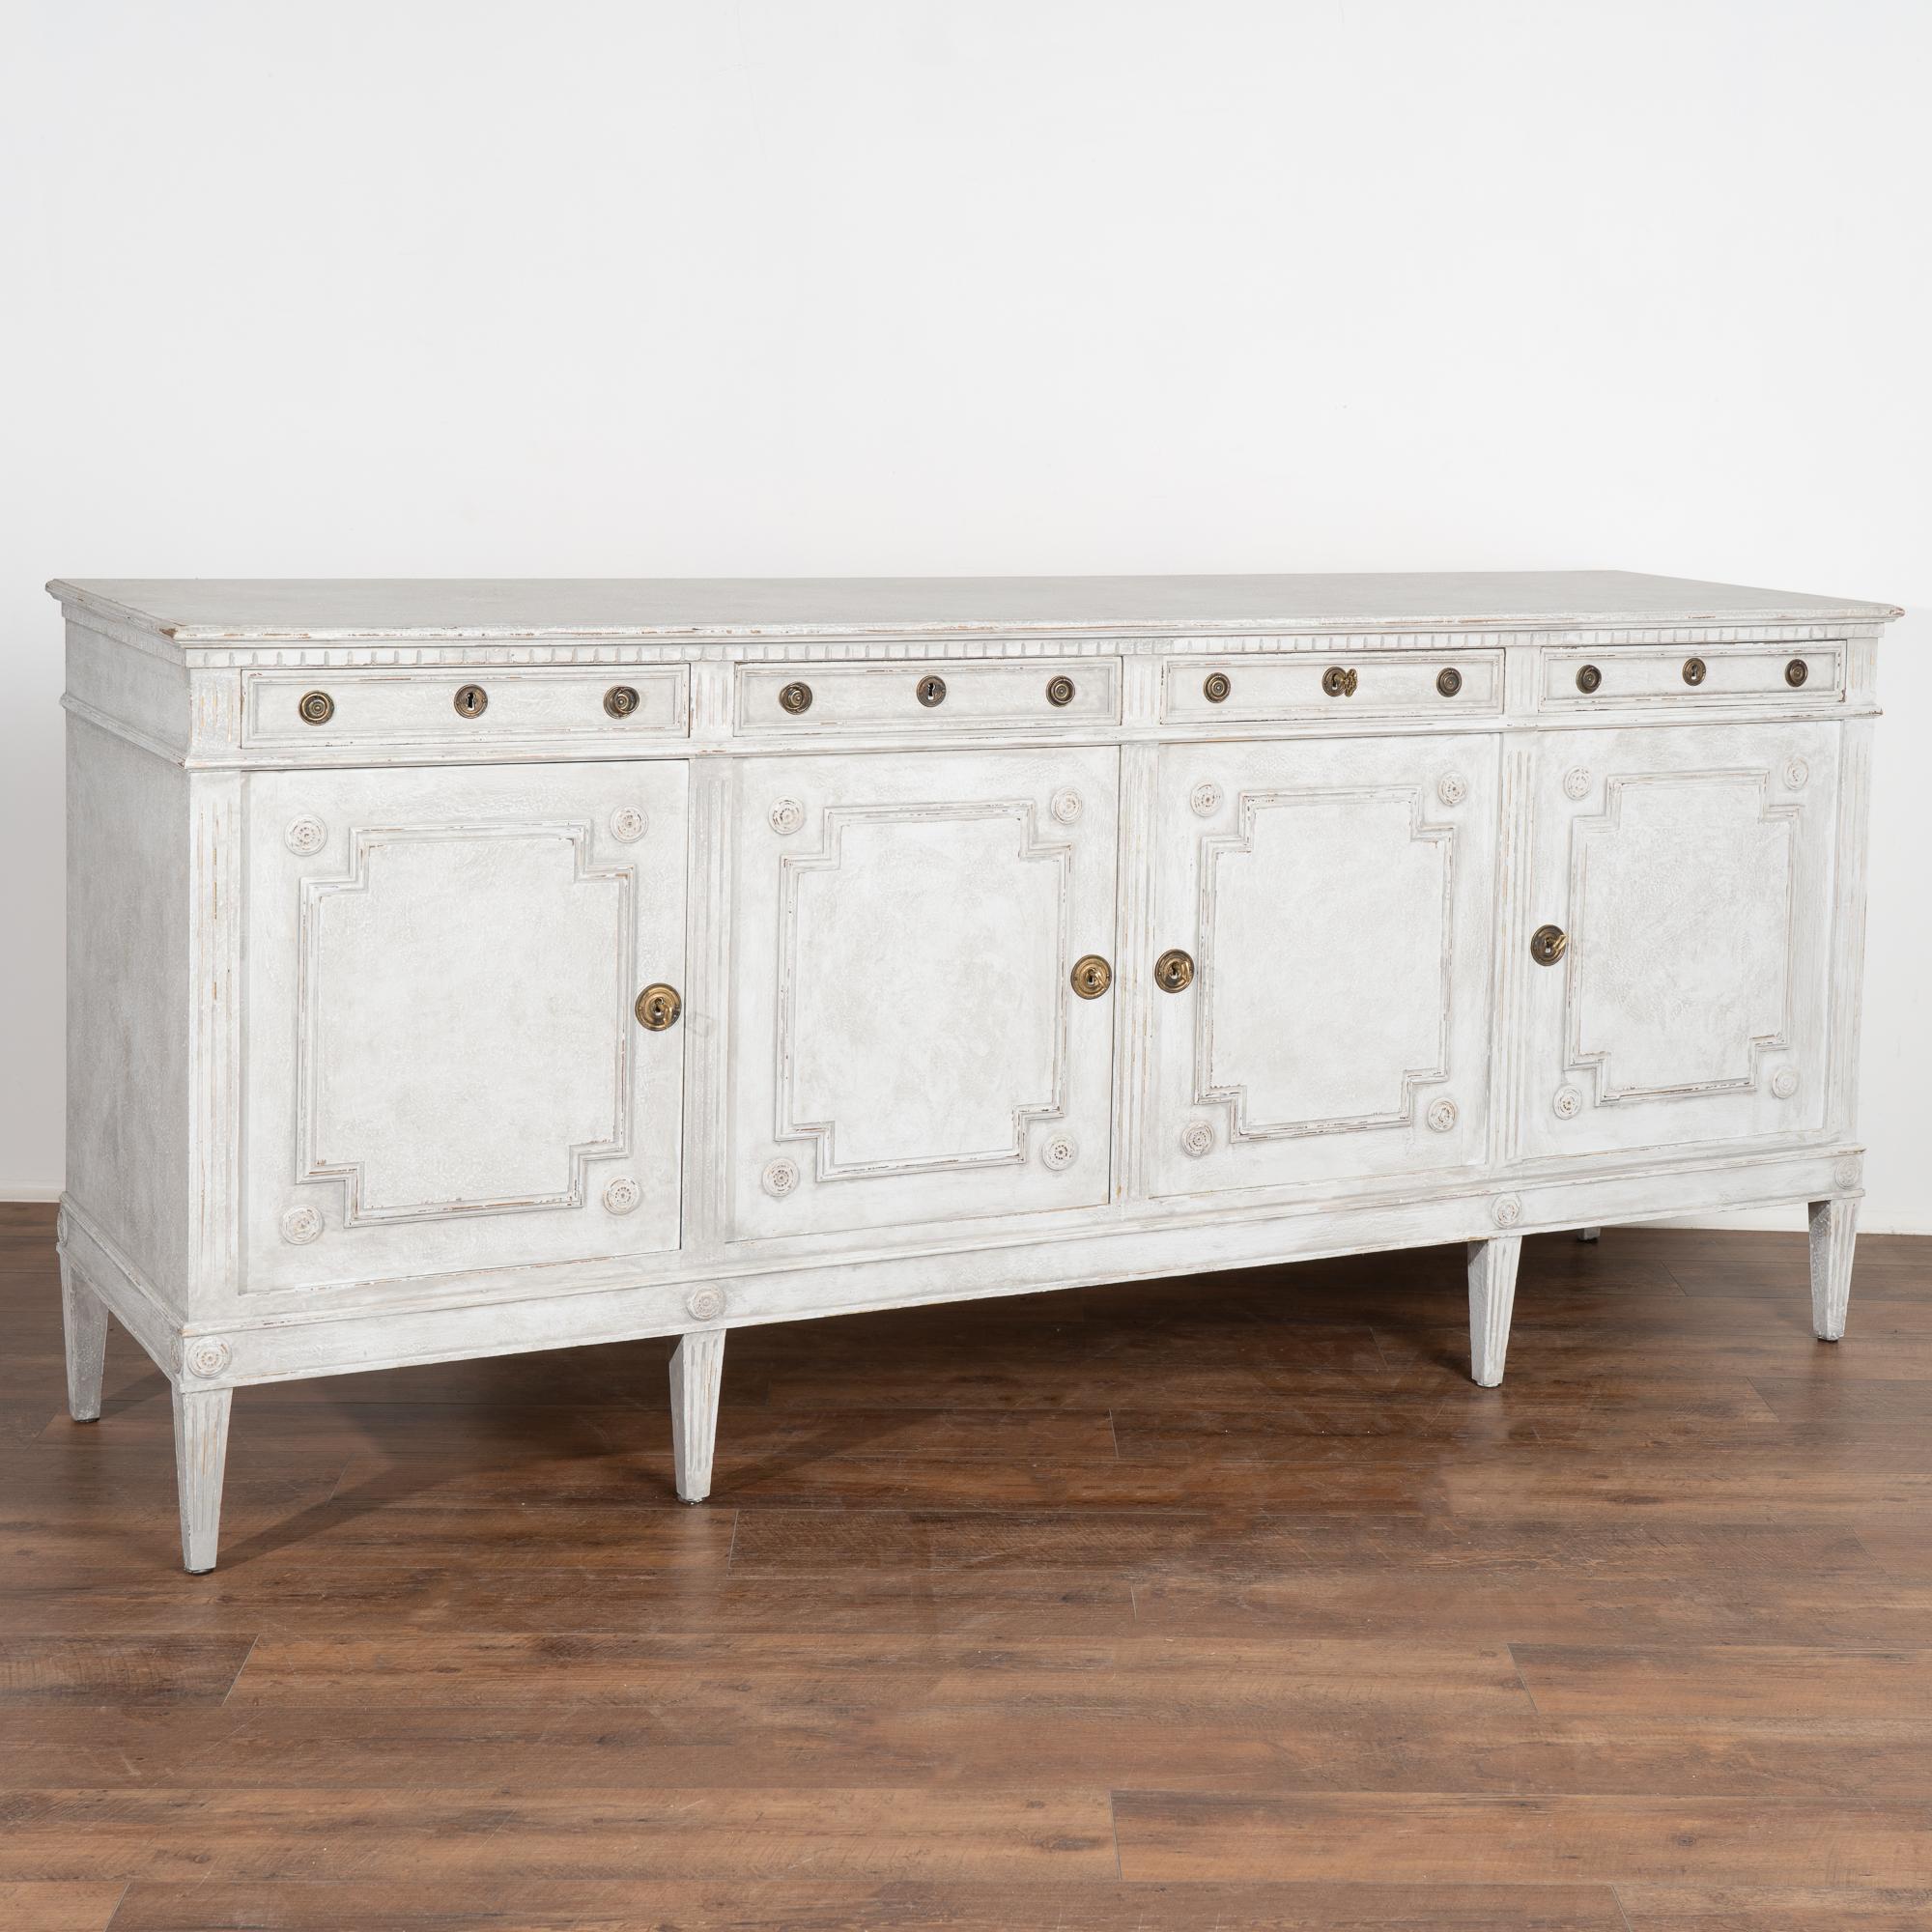 Large pine sideboard with traditional carved panel detail has been given new life with a professionally applied painted layered finish in mottled gray with white undertones.
At over 7' long with four cabinet doors, this will serve as an impressive